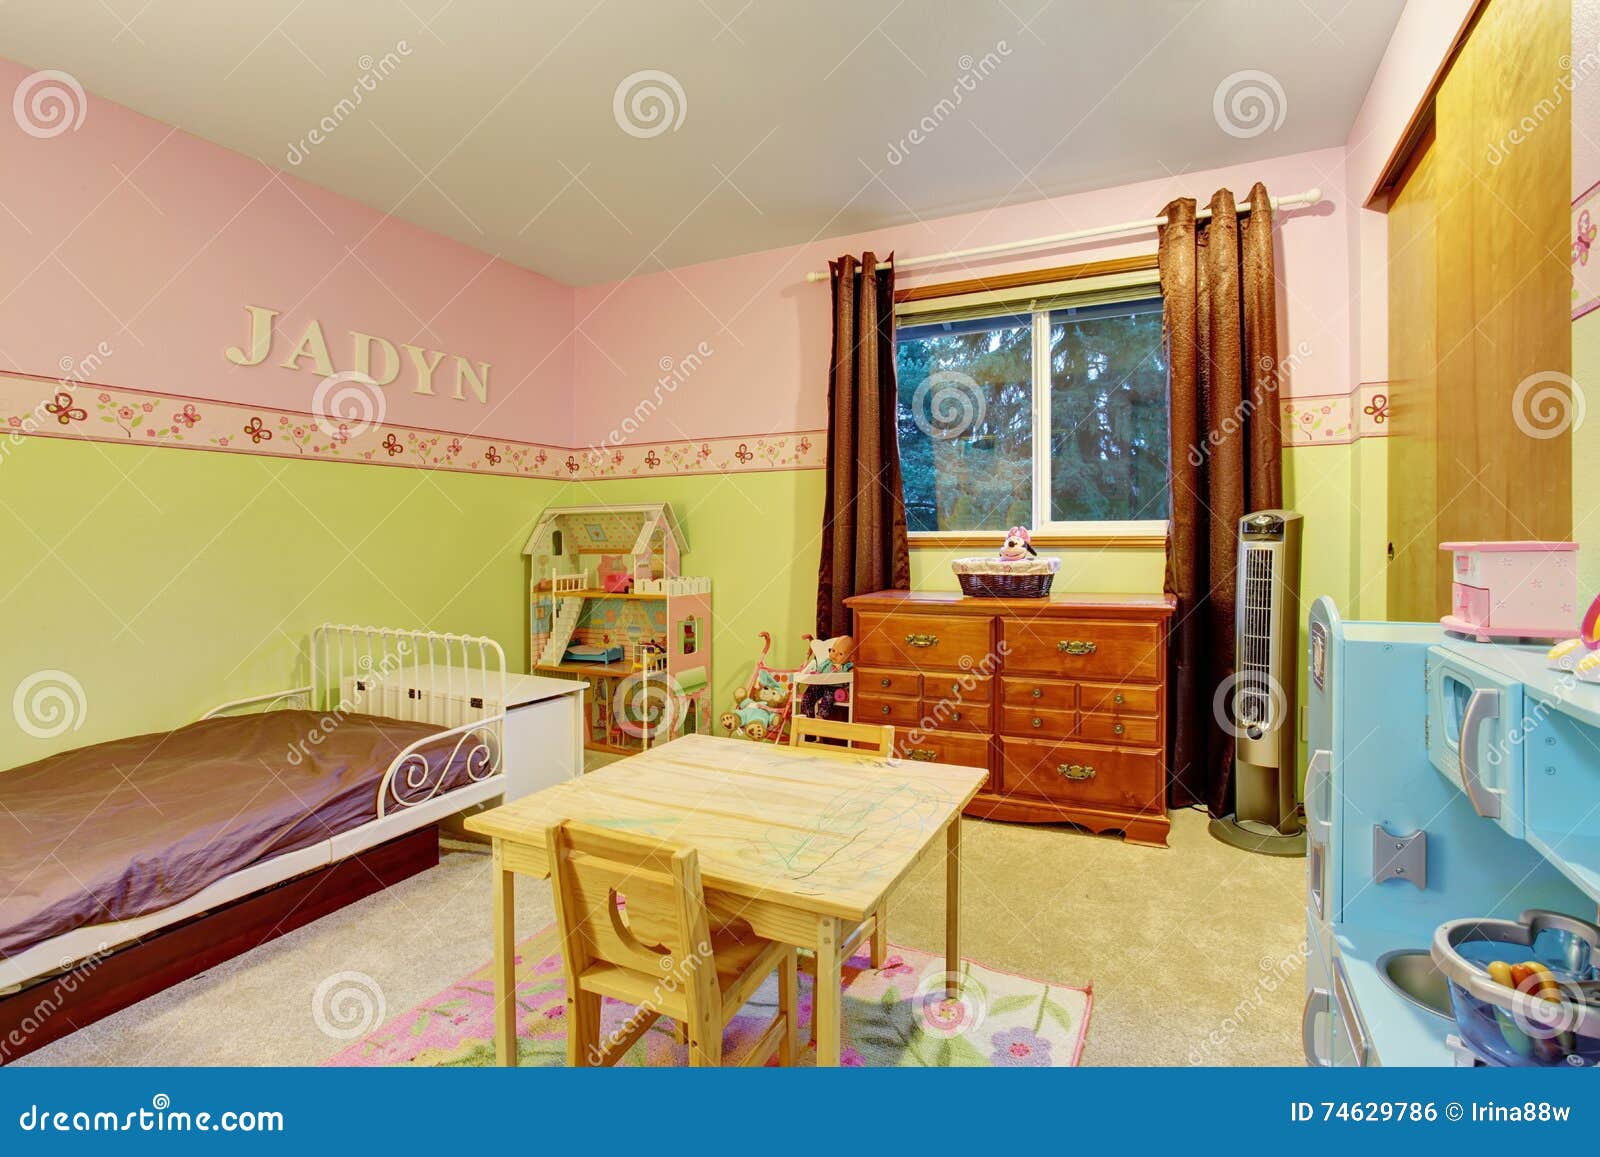 Kids Bedroom With Pink And Green Painted Walls Stock Photo Image Of Royalty Floor 74629786